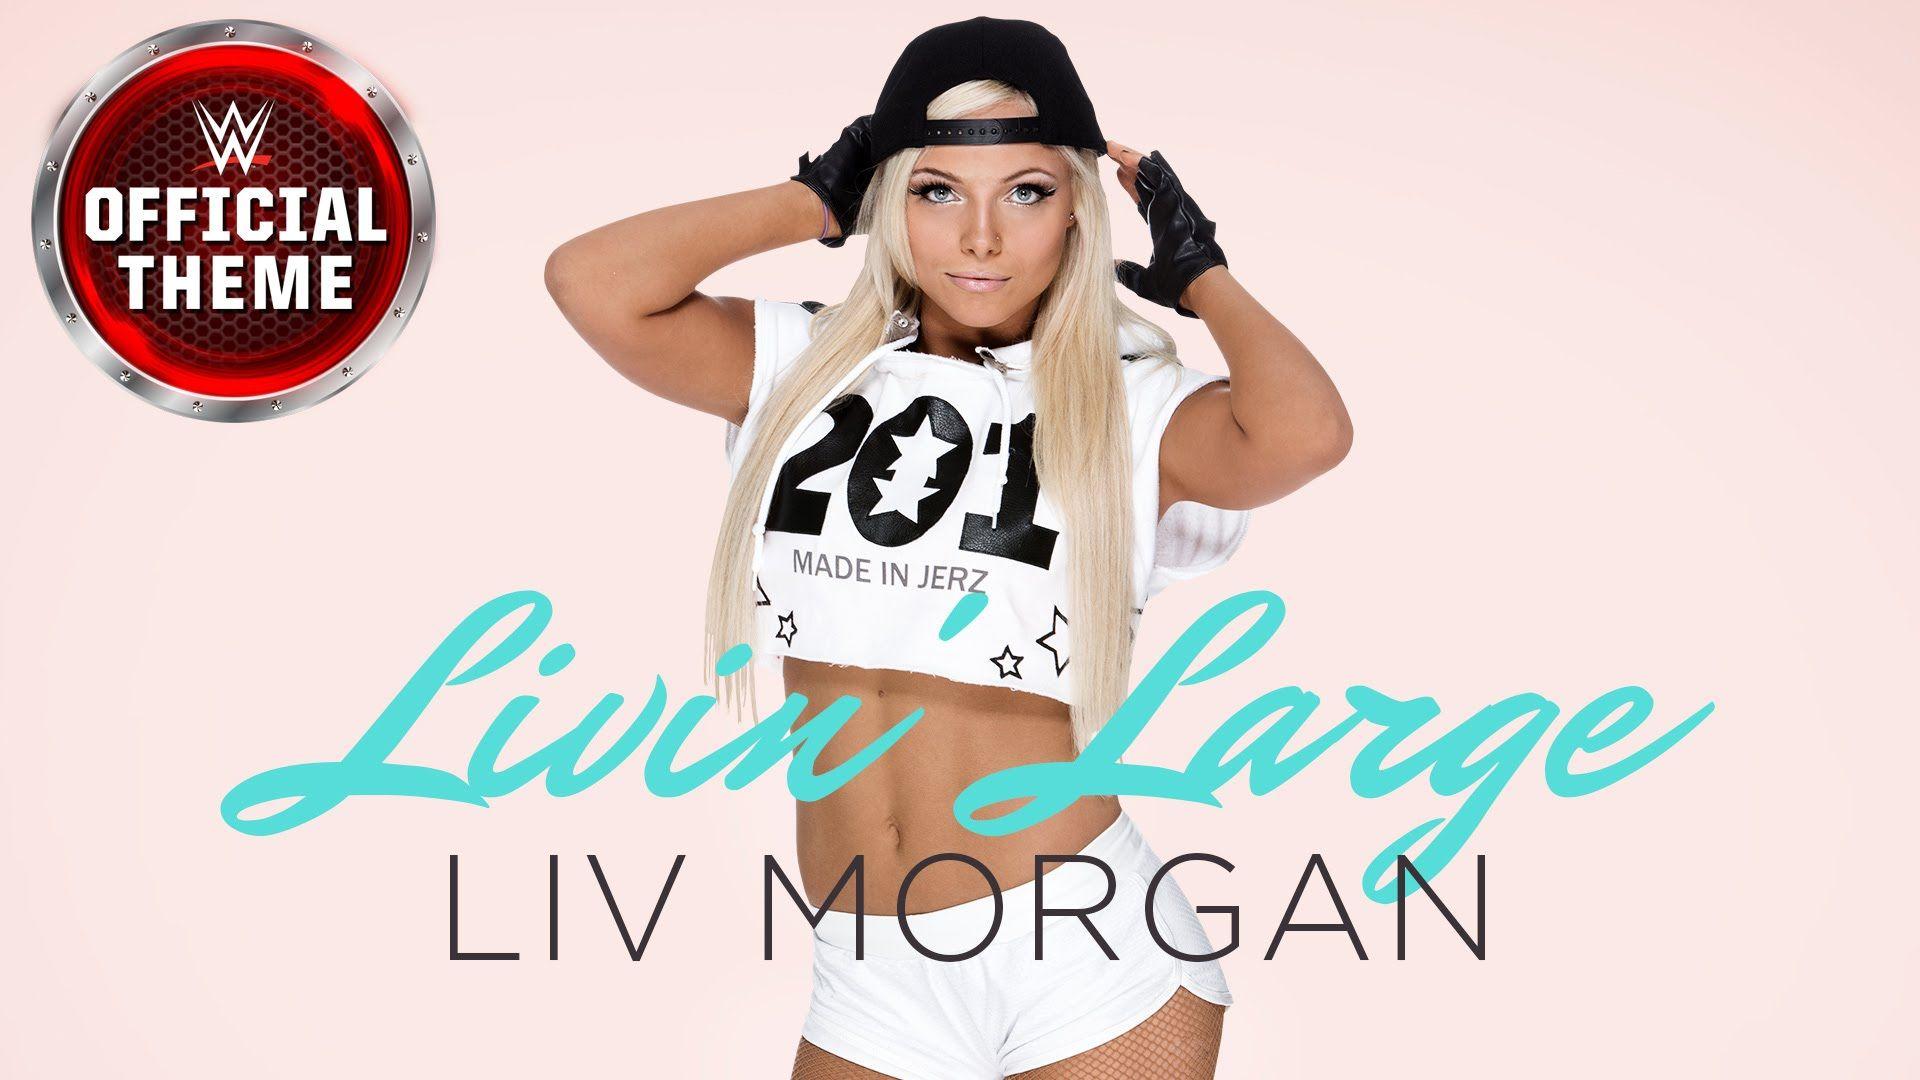 Liv Morgan News, Picture, Videos and Biography Inc